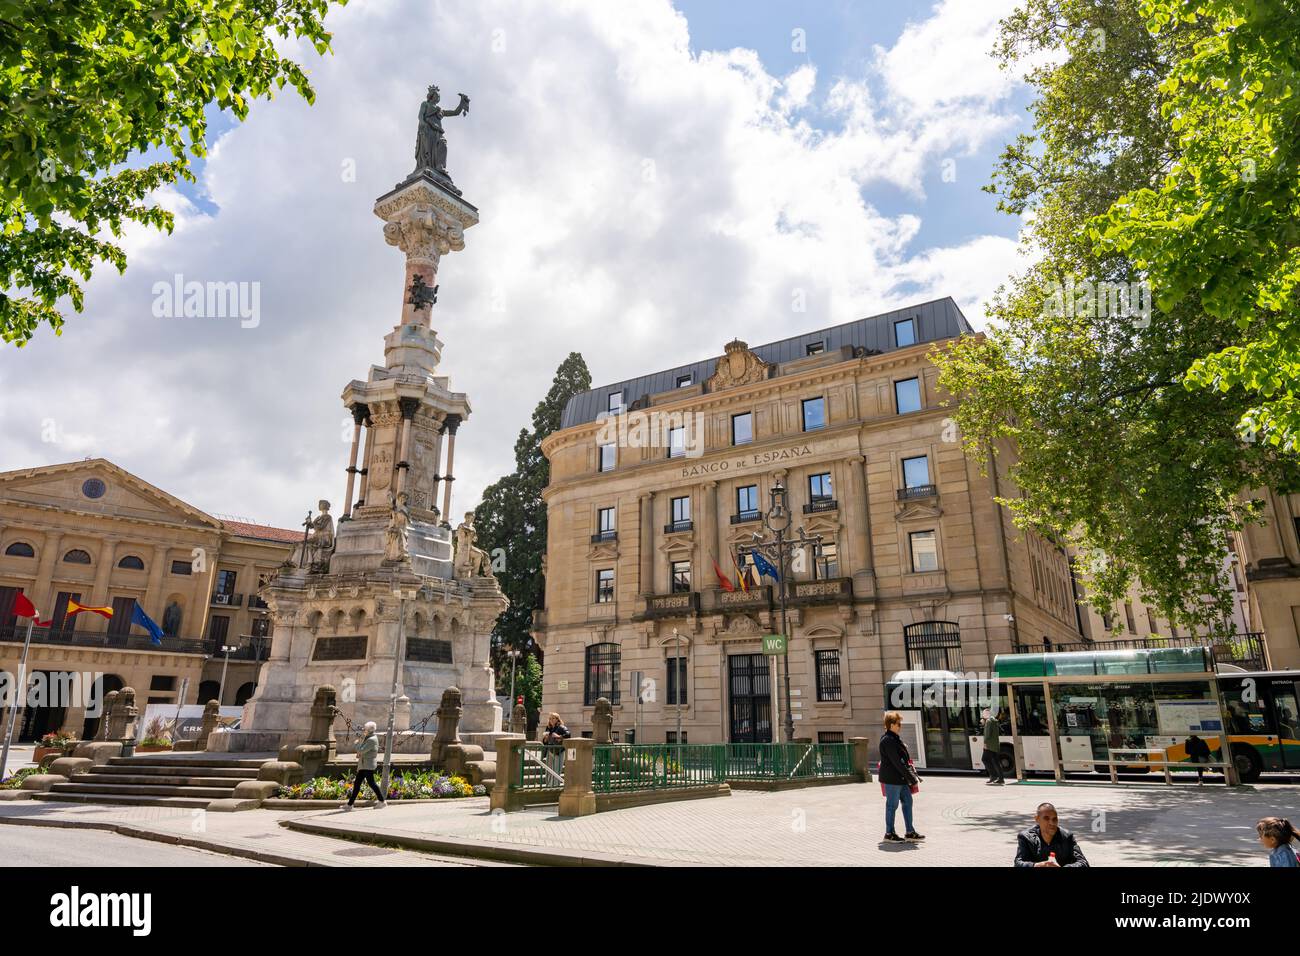 Pamplona, Spain - May 6th 2022 - Tourists passing the Monumento a los Fueros (monument of the charters) Stock Photo